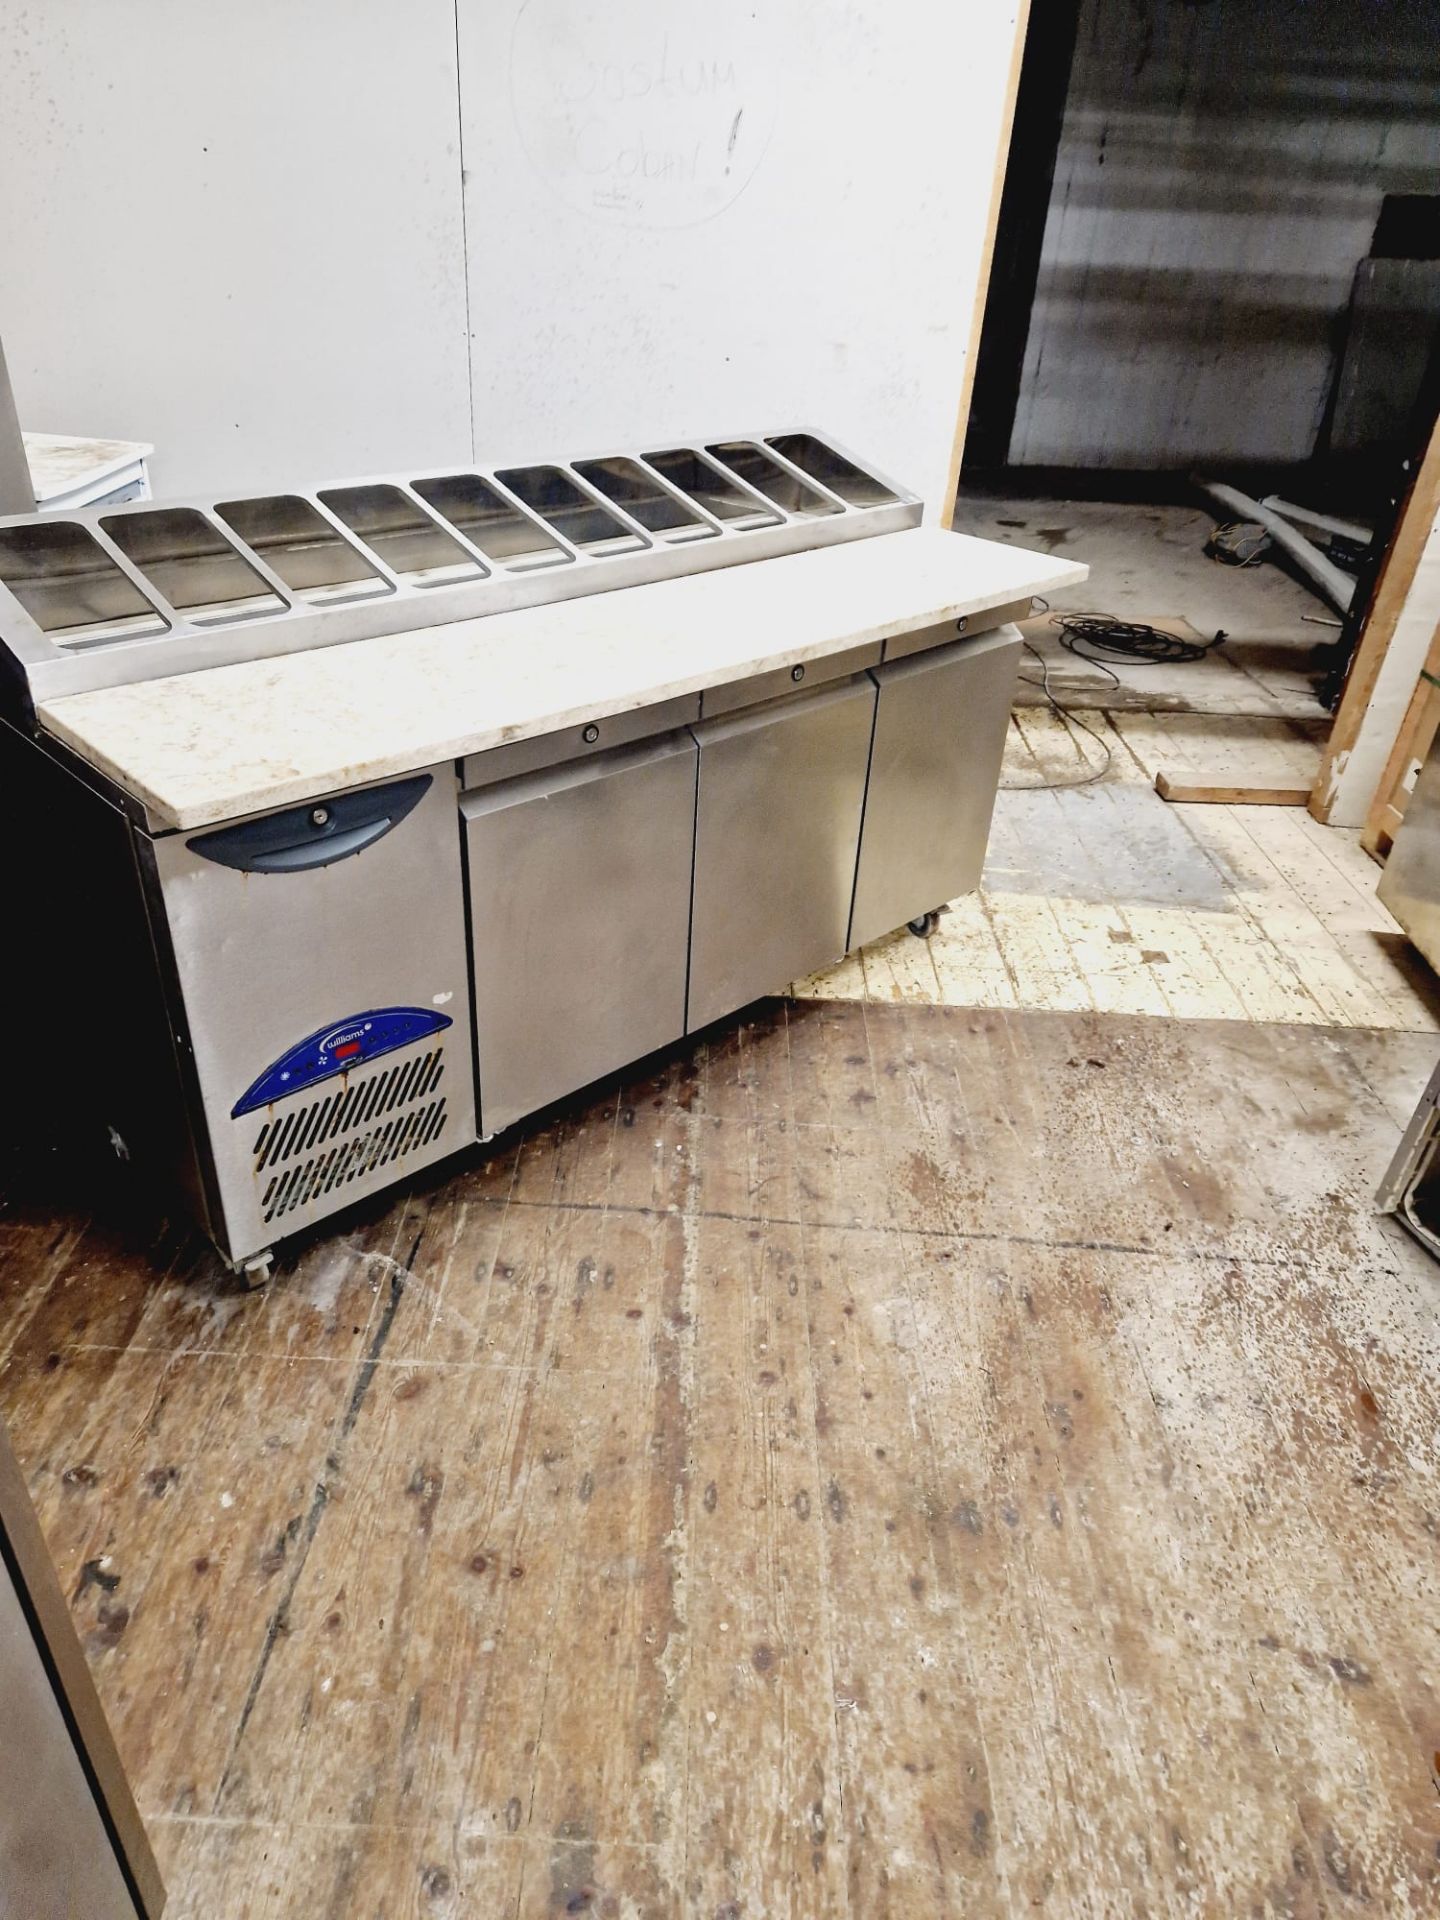 WILLIAMS PIZZA PERP FRIDGE WITH GRANITE WORK TOP - 3 DOOR PIZZA TOPPING  FRIDGE - FULLY WORKING AND  - Image 2 of 2